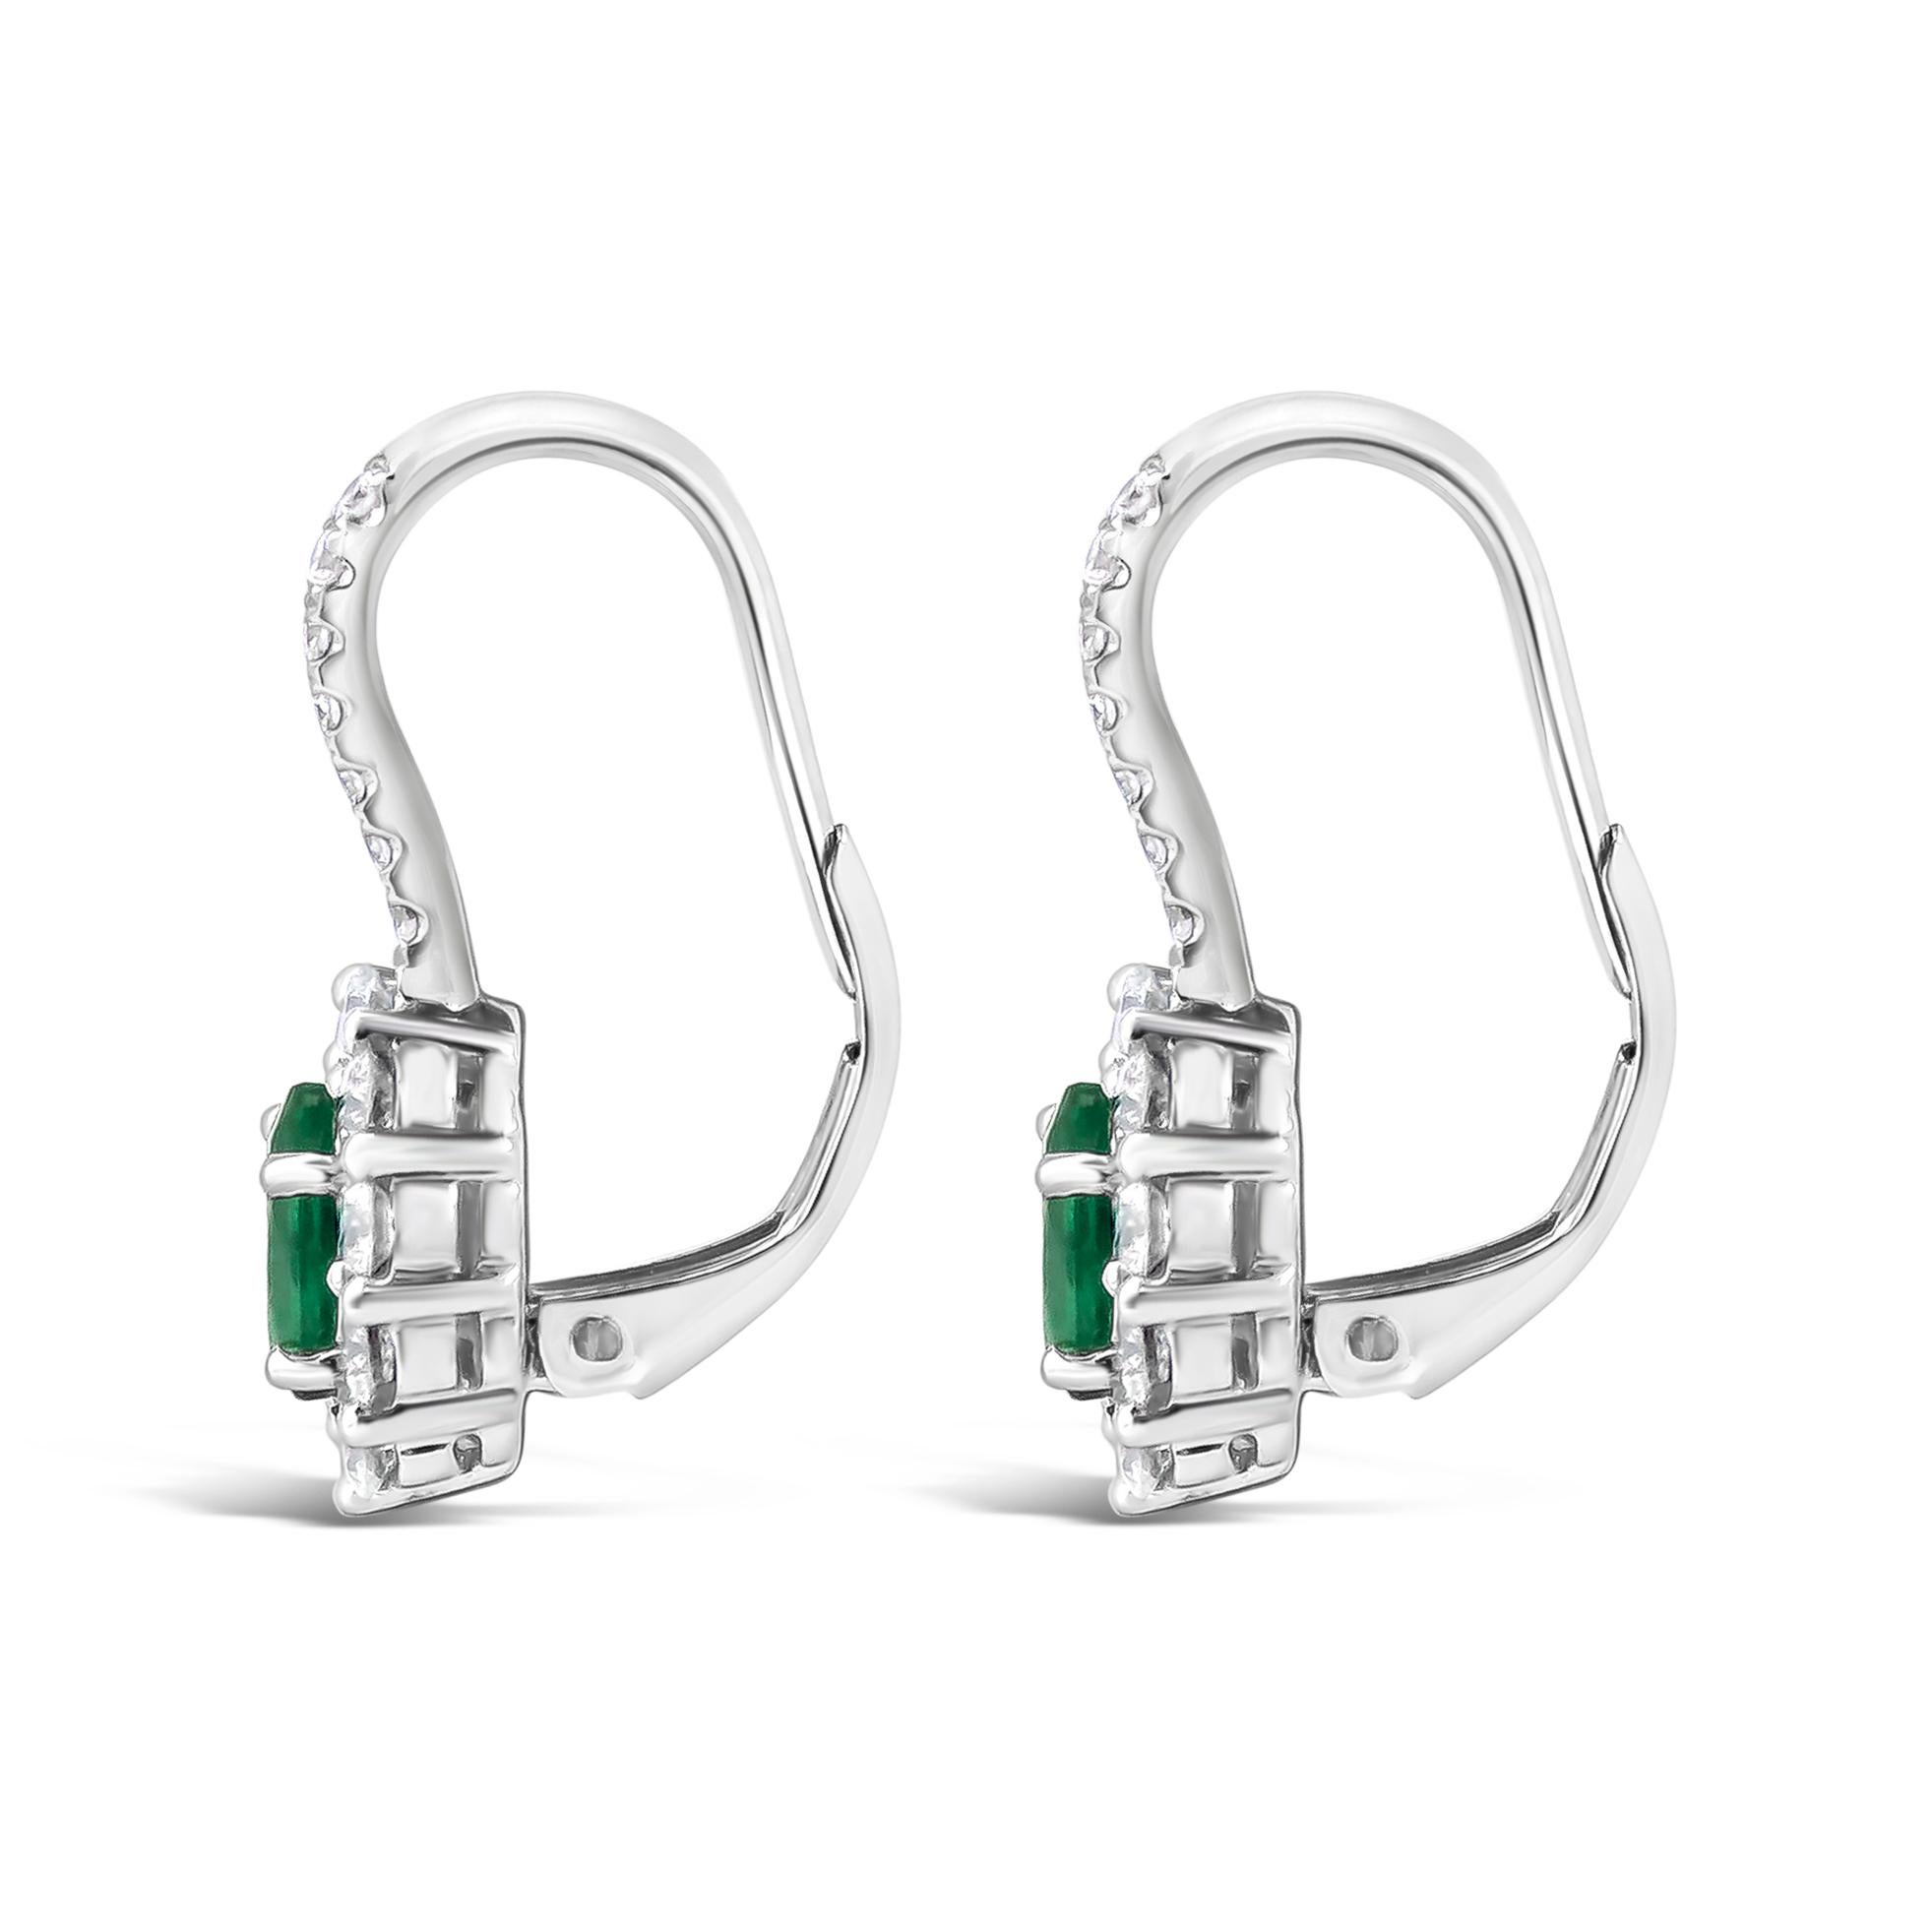 Showcases color-rich green emeralds weighing 0.78 carats total, elegantly set in a diamond surround. Attached to an 18K white gold lever-back accented with diamonds. Diamonds weigh 0.92 carats total.

Roman Malakov is a custom house, specializing in